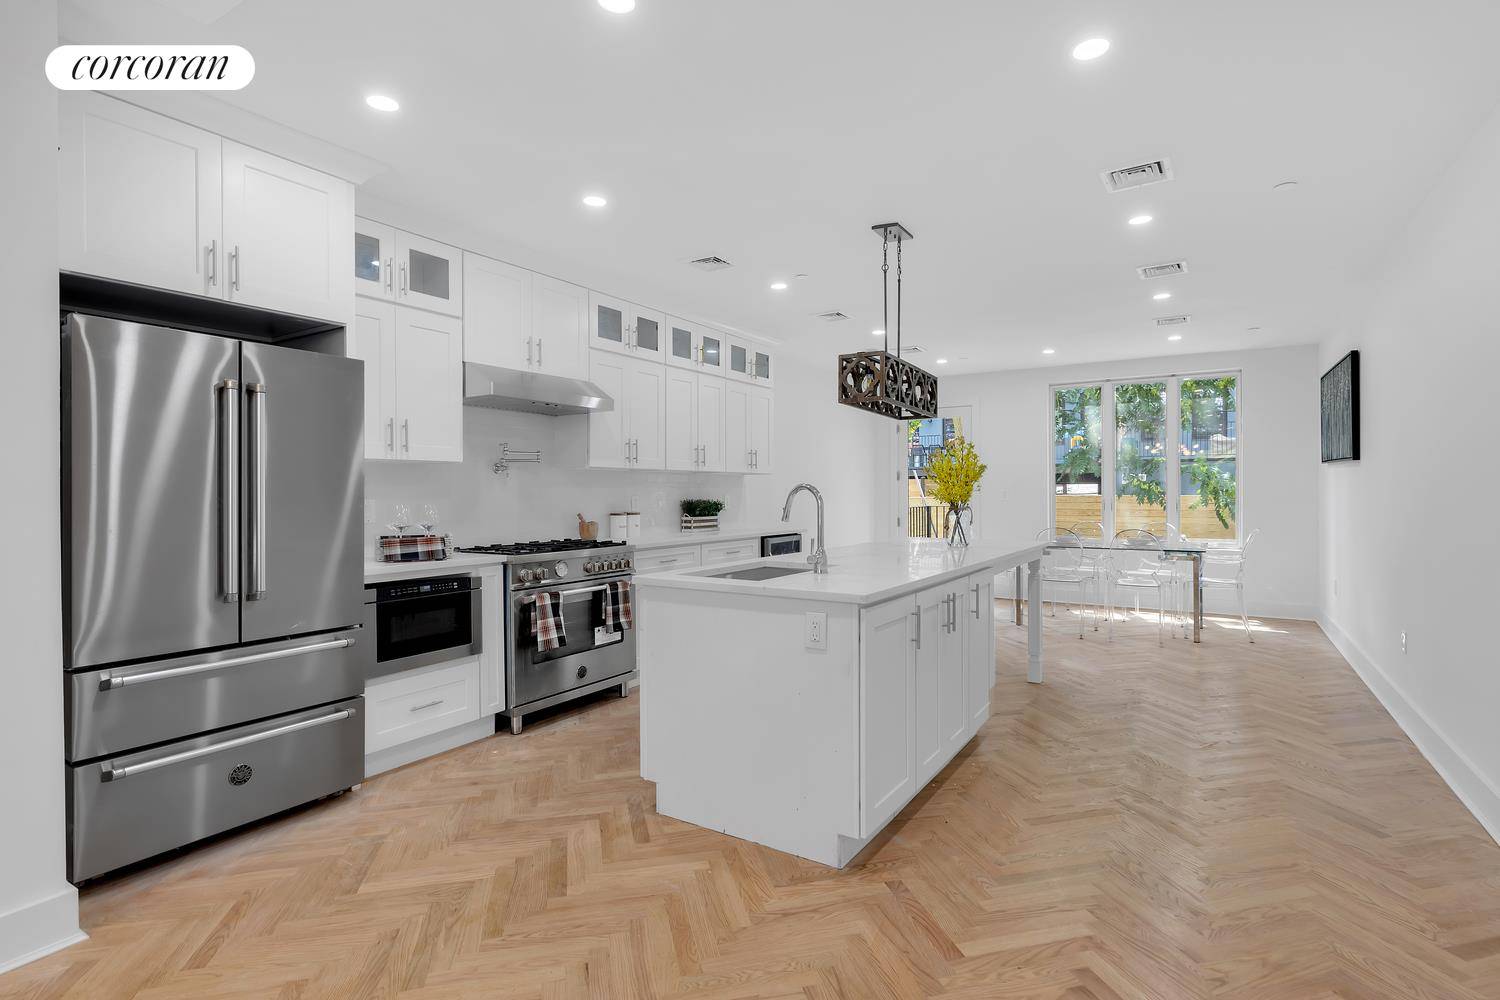 New Price ! Introducing 312 22nd Street ; a meticulously gut renovated two family townhouse with no stone left unturned and brand new extensions built to provide an expansive layout ...